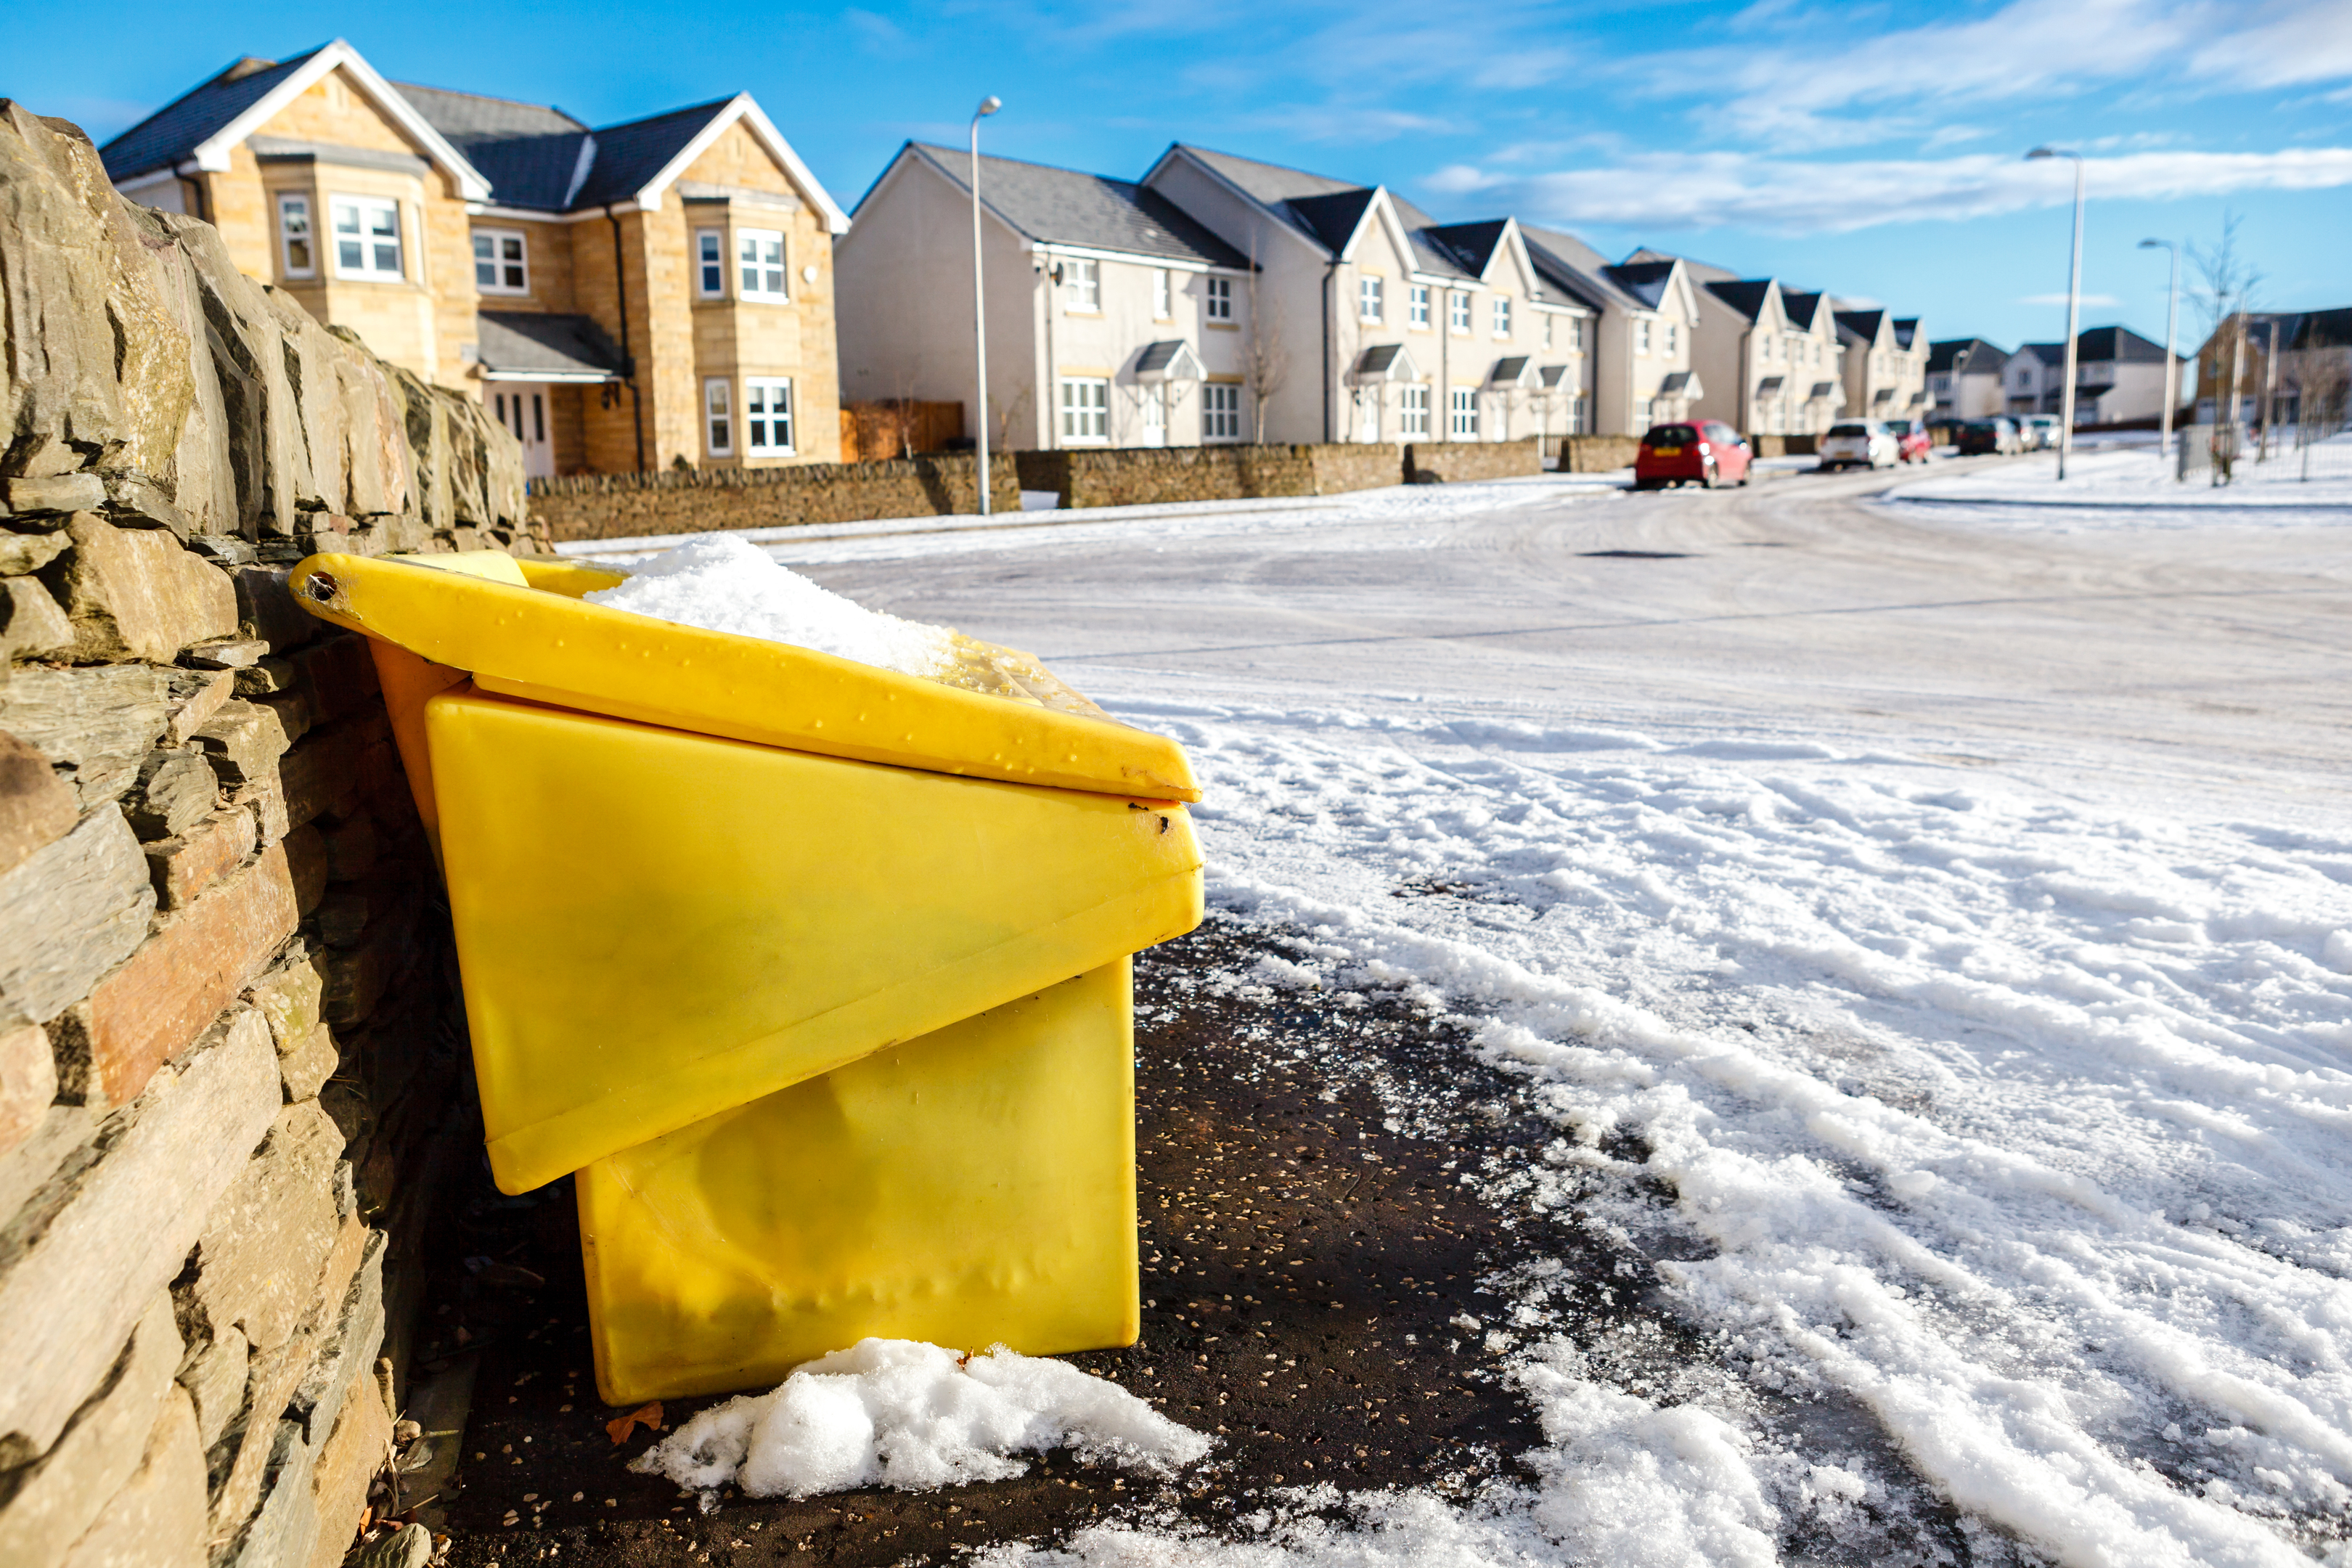 Council shows it's worth its salt in replacing grit bins